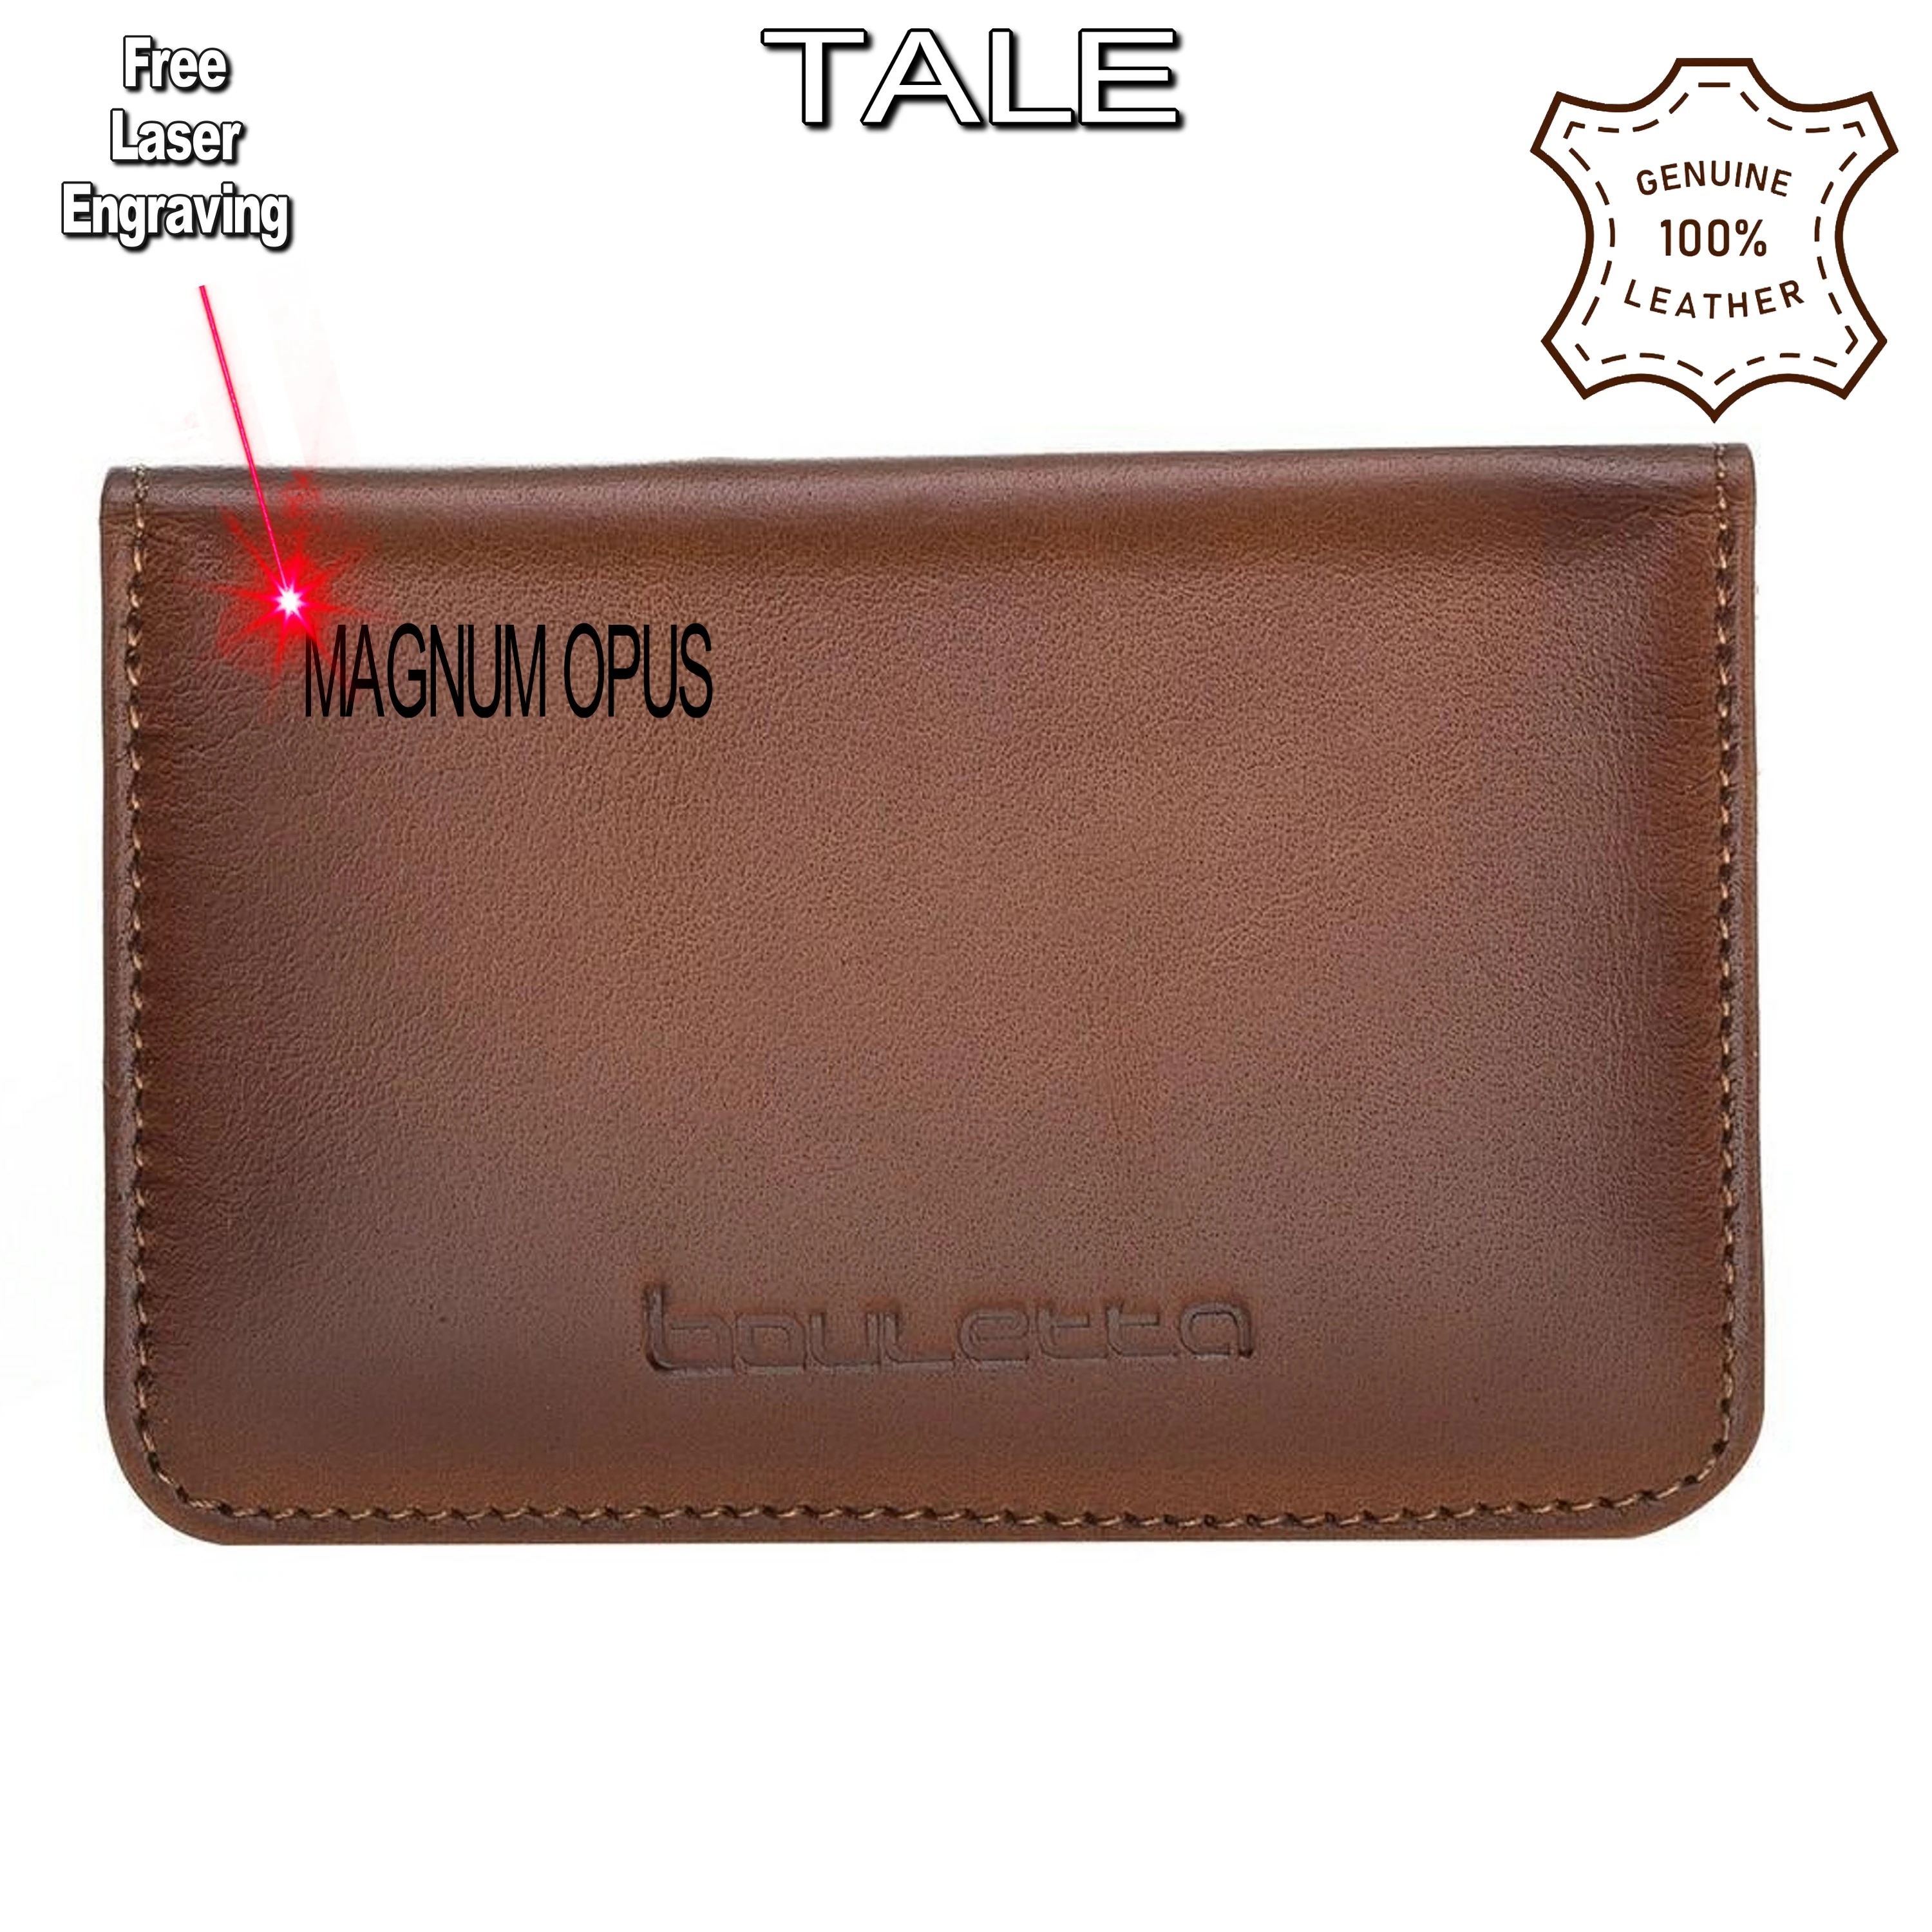 Handmade Genuine Leather Magnetic Closure Credit Card and ID Card Holder Elegant and Stylish Stores Up To 10 Cards Wallet